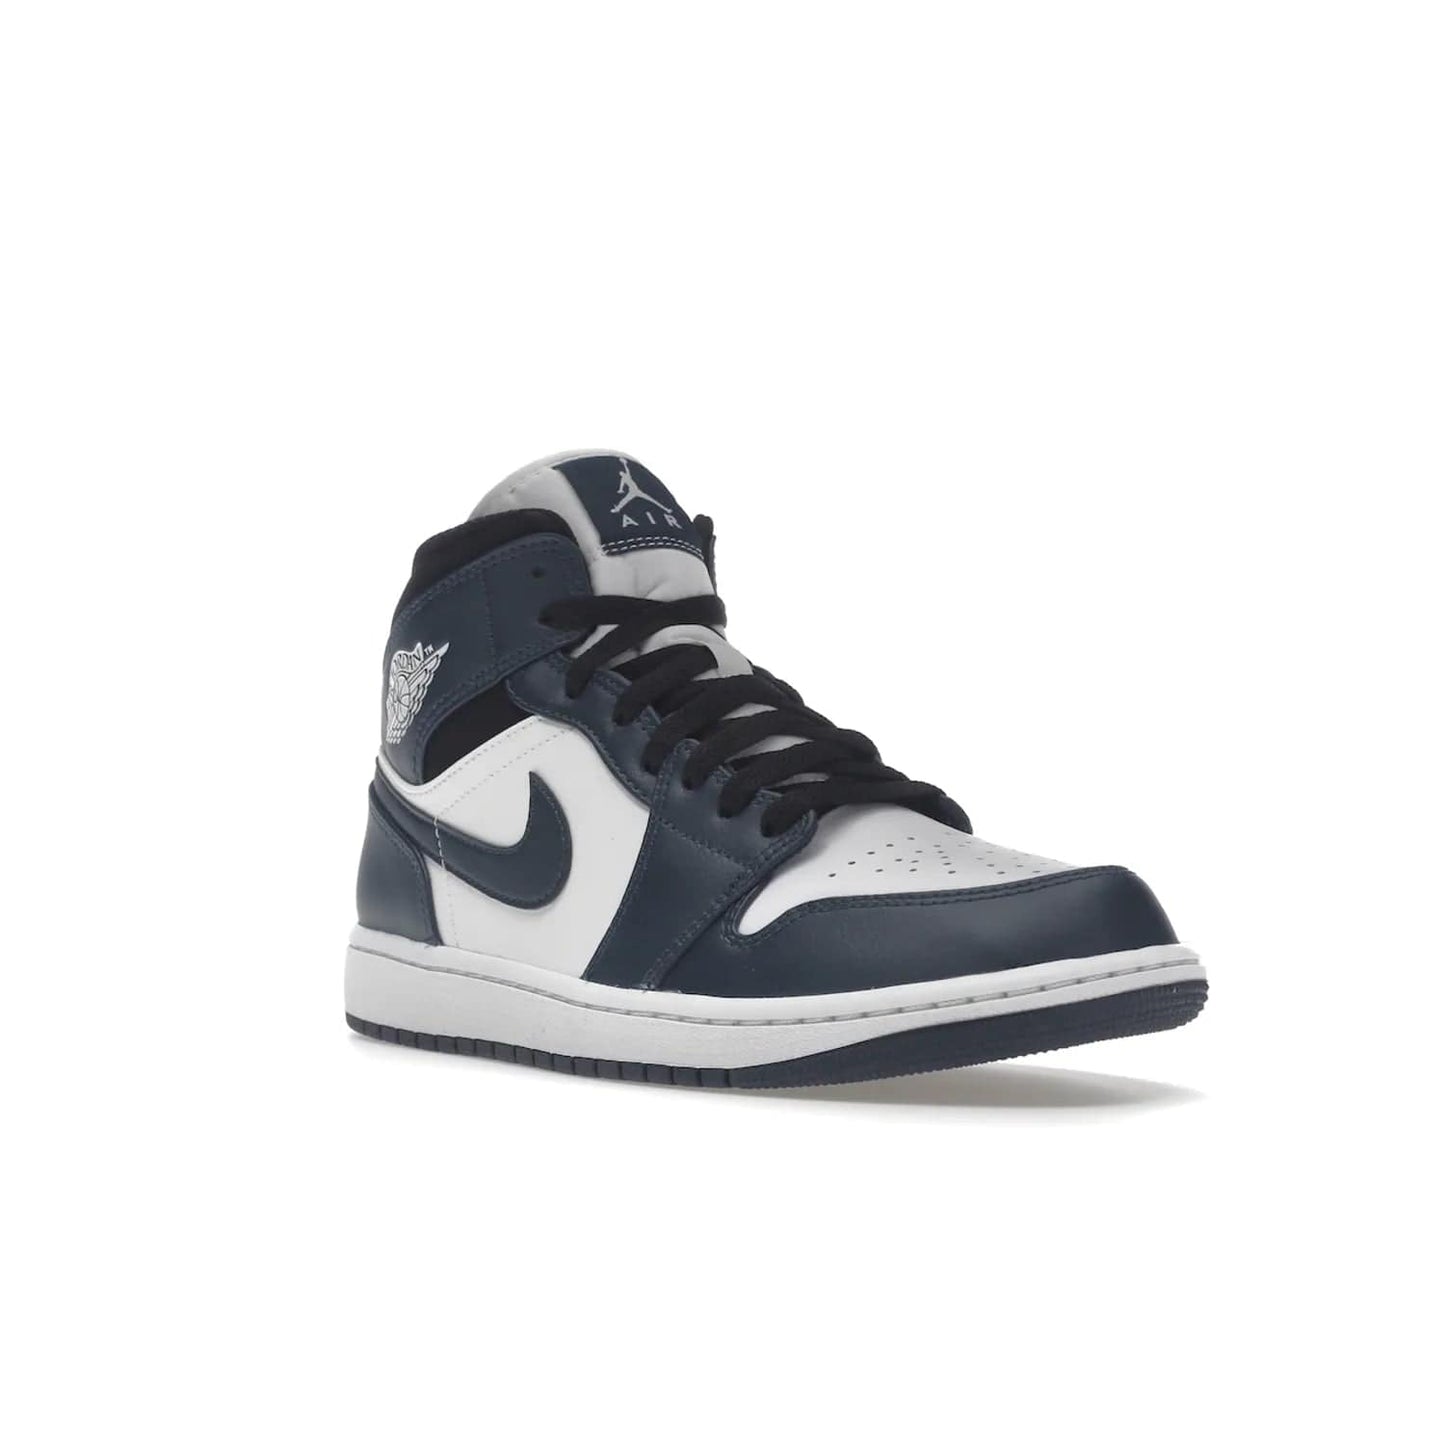 Jordan 1 Mid Armory Navy - Image 6 - Only at www.BallersClubKickz.com - The Jordan 1 Mid Armory Navy: classic basketball sneaker with soft white leather upper, deep navy blue overlays, and black leather ankle detailing. Iconic style with Jordan Wings logo and Jumpman label.